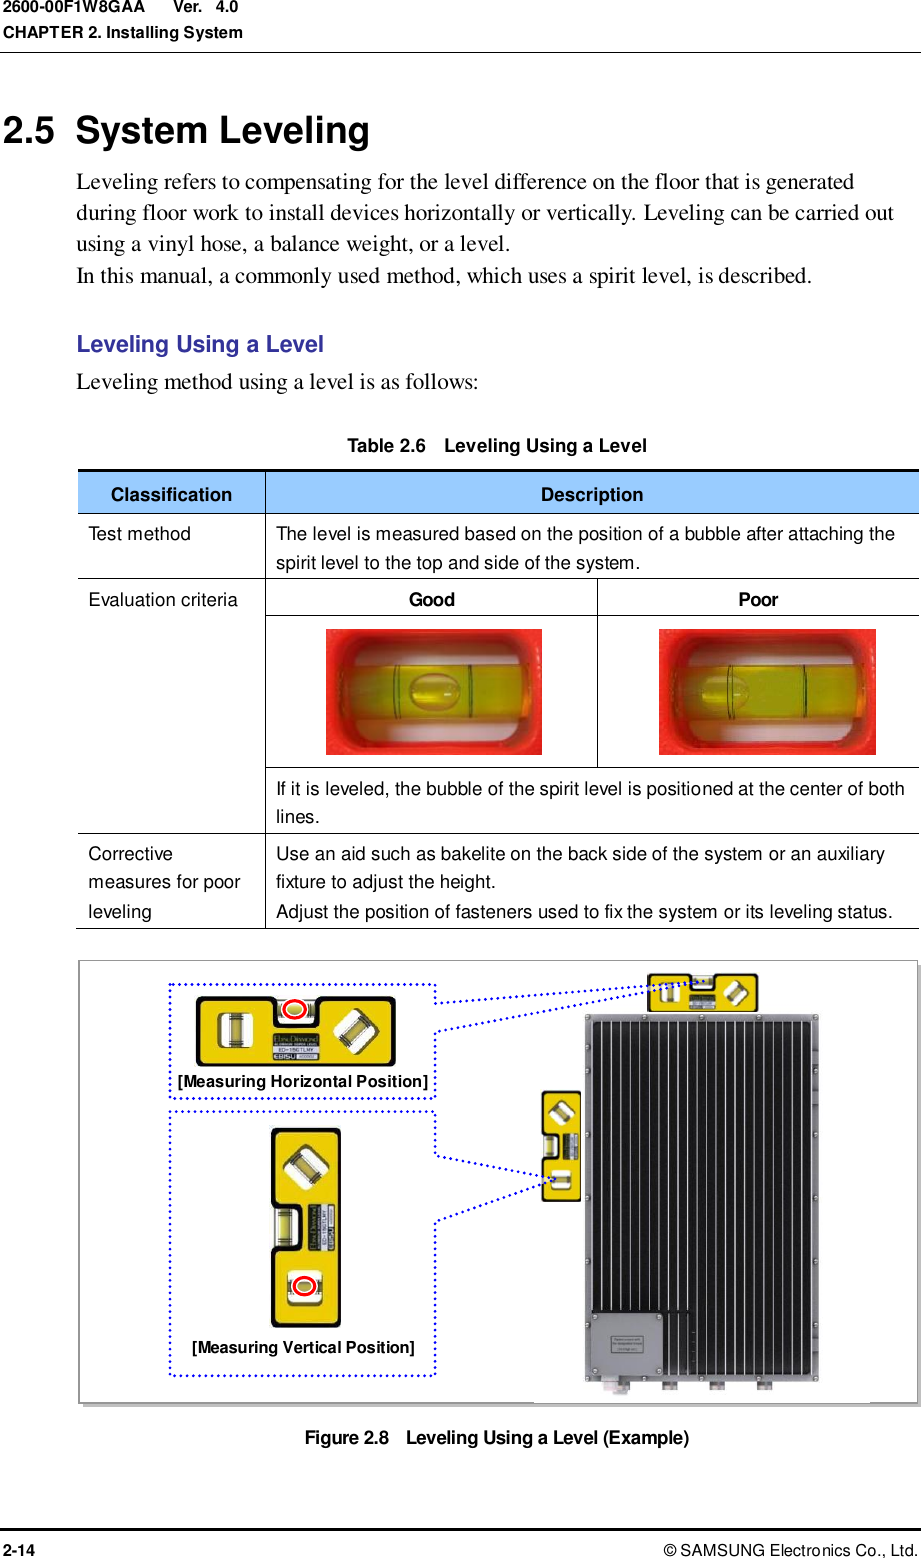  Ver.  CHAPTER 2. Installing System 2-14 ©  SAMSUNG Electronics Co., Ltd. 2600-00F1W8GAA 4.0 2.5  System Leveling Leveling refers to compensating for the level difference on the floor that is generated during floor work to install devices horizontally or vertically. Leveling can be carried out using a vinyl hose, a balance weight, or a level. In this manual, a commonly used method, which uses a spirit level, is described.  Leveling Using a Level Leveling method using a level is as follows:  Table 2.6    Leveling Using a Level Classification Description Test method The level is measured based on the position of a bubble after attaching the spirit level to the top and side of the system. Evaluation criteria Good Poor       If it is leveled, the bubble of the spirit level is positioned at the center of both lines. Corrective measures for poor leveling Use an aid such as bakelite on the back side of the system or an auxiliary fixture to adjust the height. Adjust the position of fasteners used to fix the system or its leveling status.  Figure 2.8   Leveling Using a Level (Example)   [Measuring Vertical Position] [Measuring Horizontal Position] 